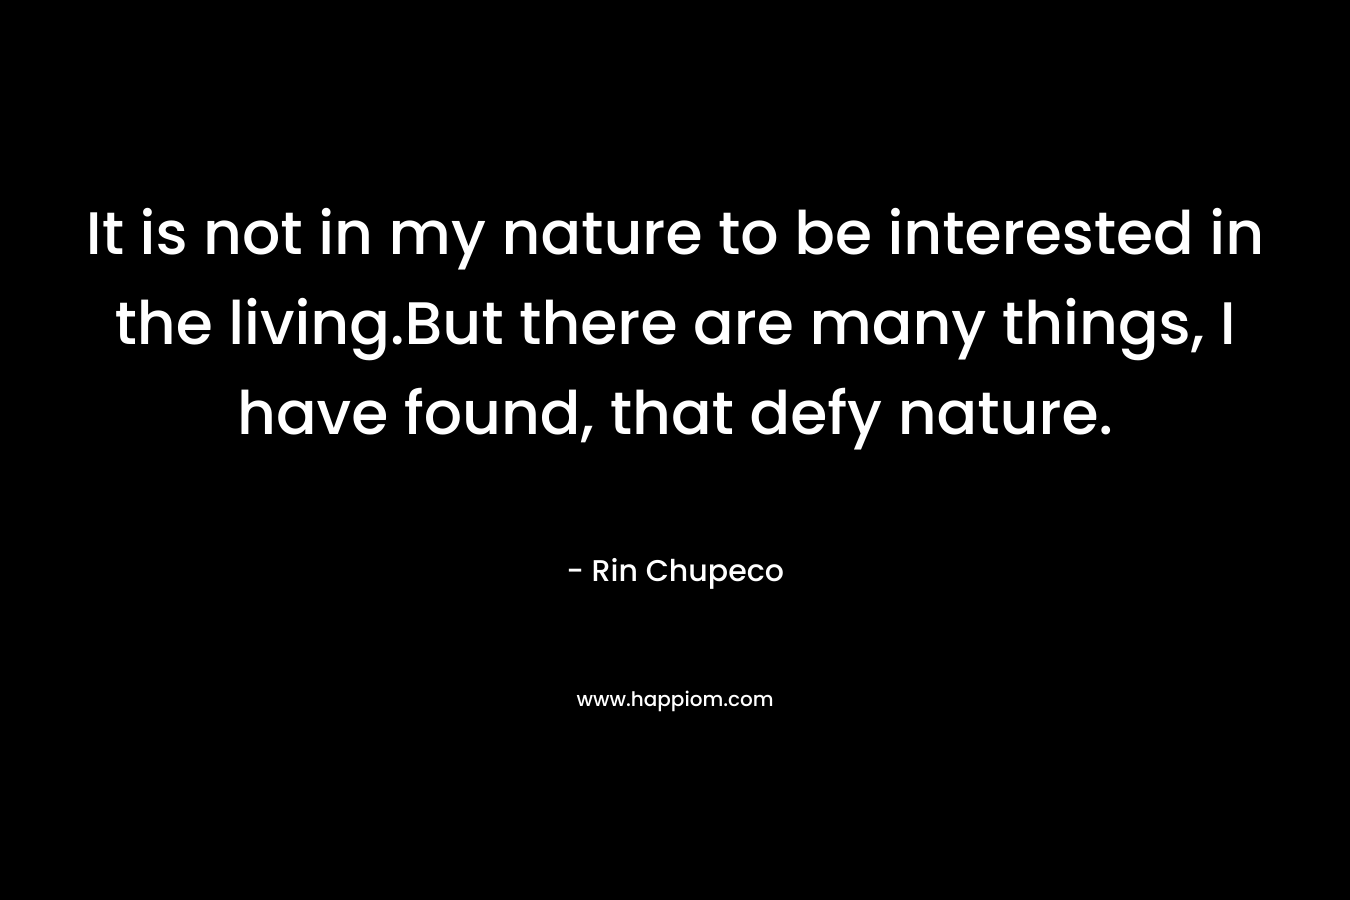 It is not in my nature to be interested in the living.But there are many things, I have found, that defy nature.